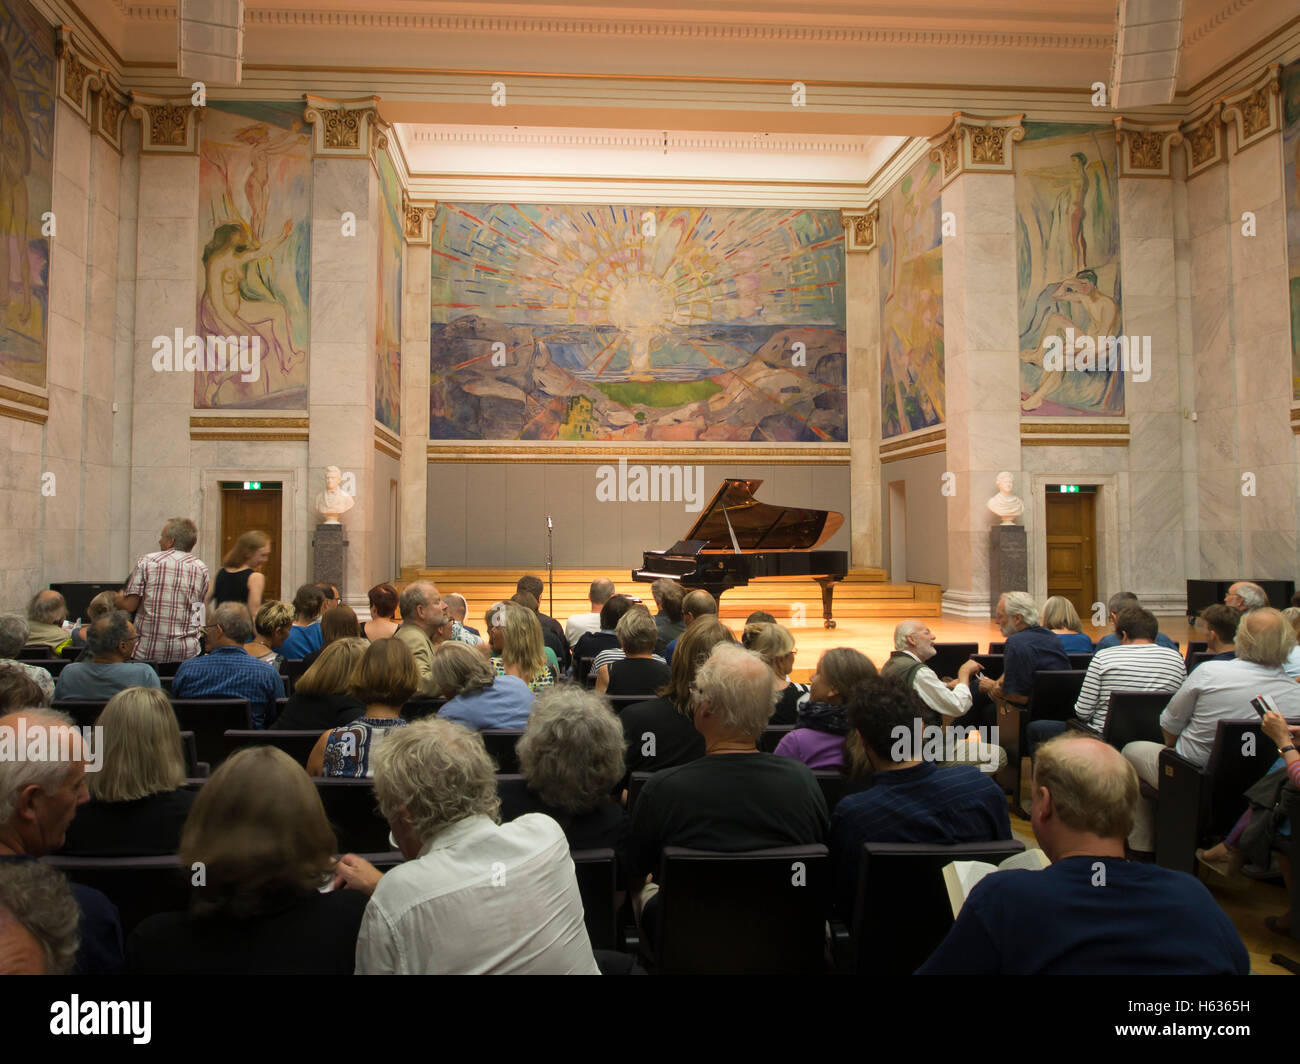 Universitetets Aula, Oslo University Hall in Norway, has three monumental paintings / murals by Edvard Munch, concert audience and 'Solen' - the sun Stock Photo